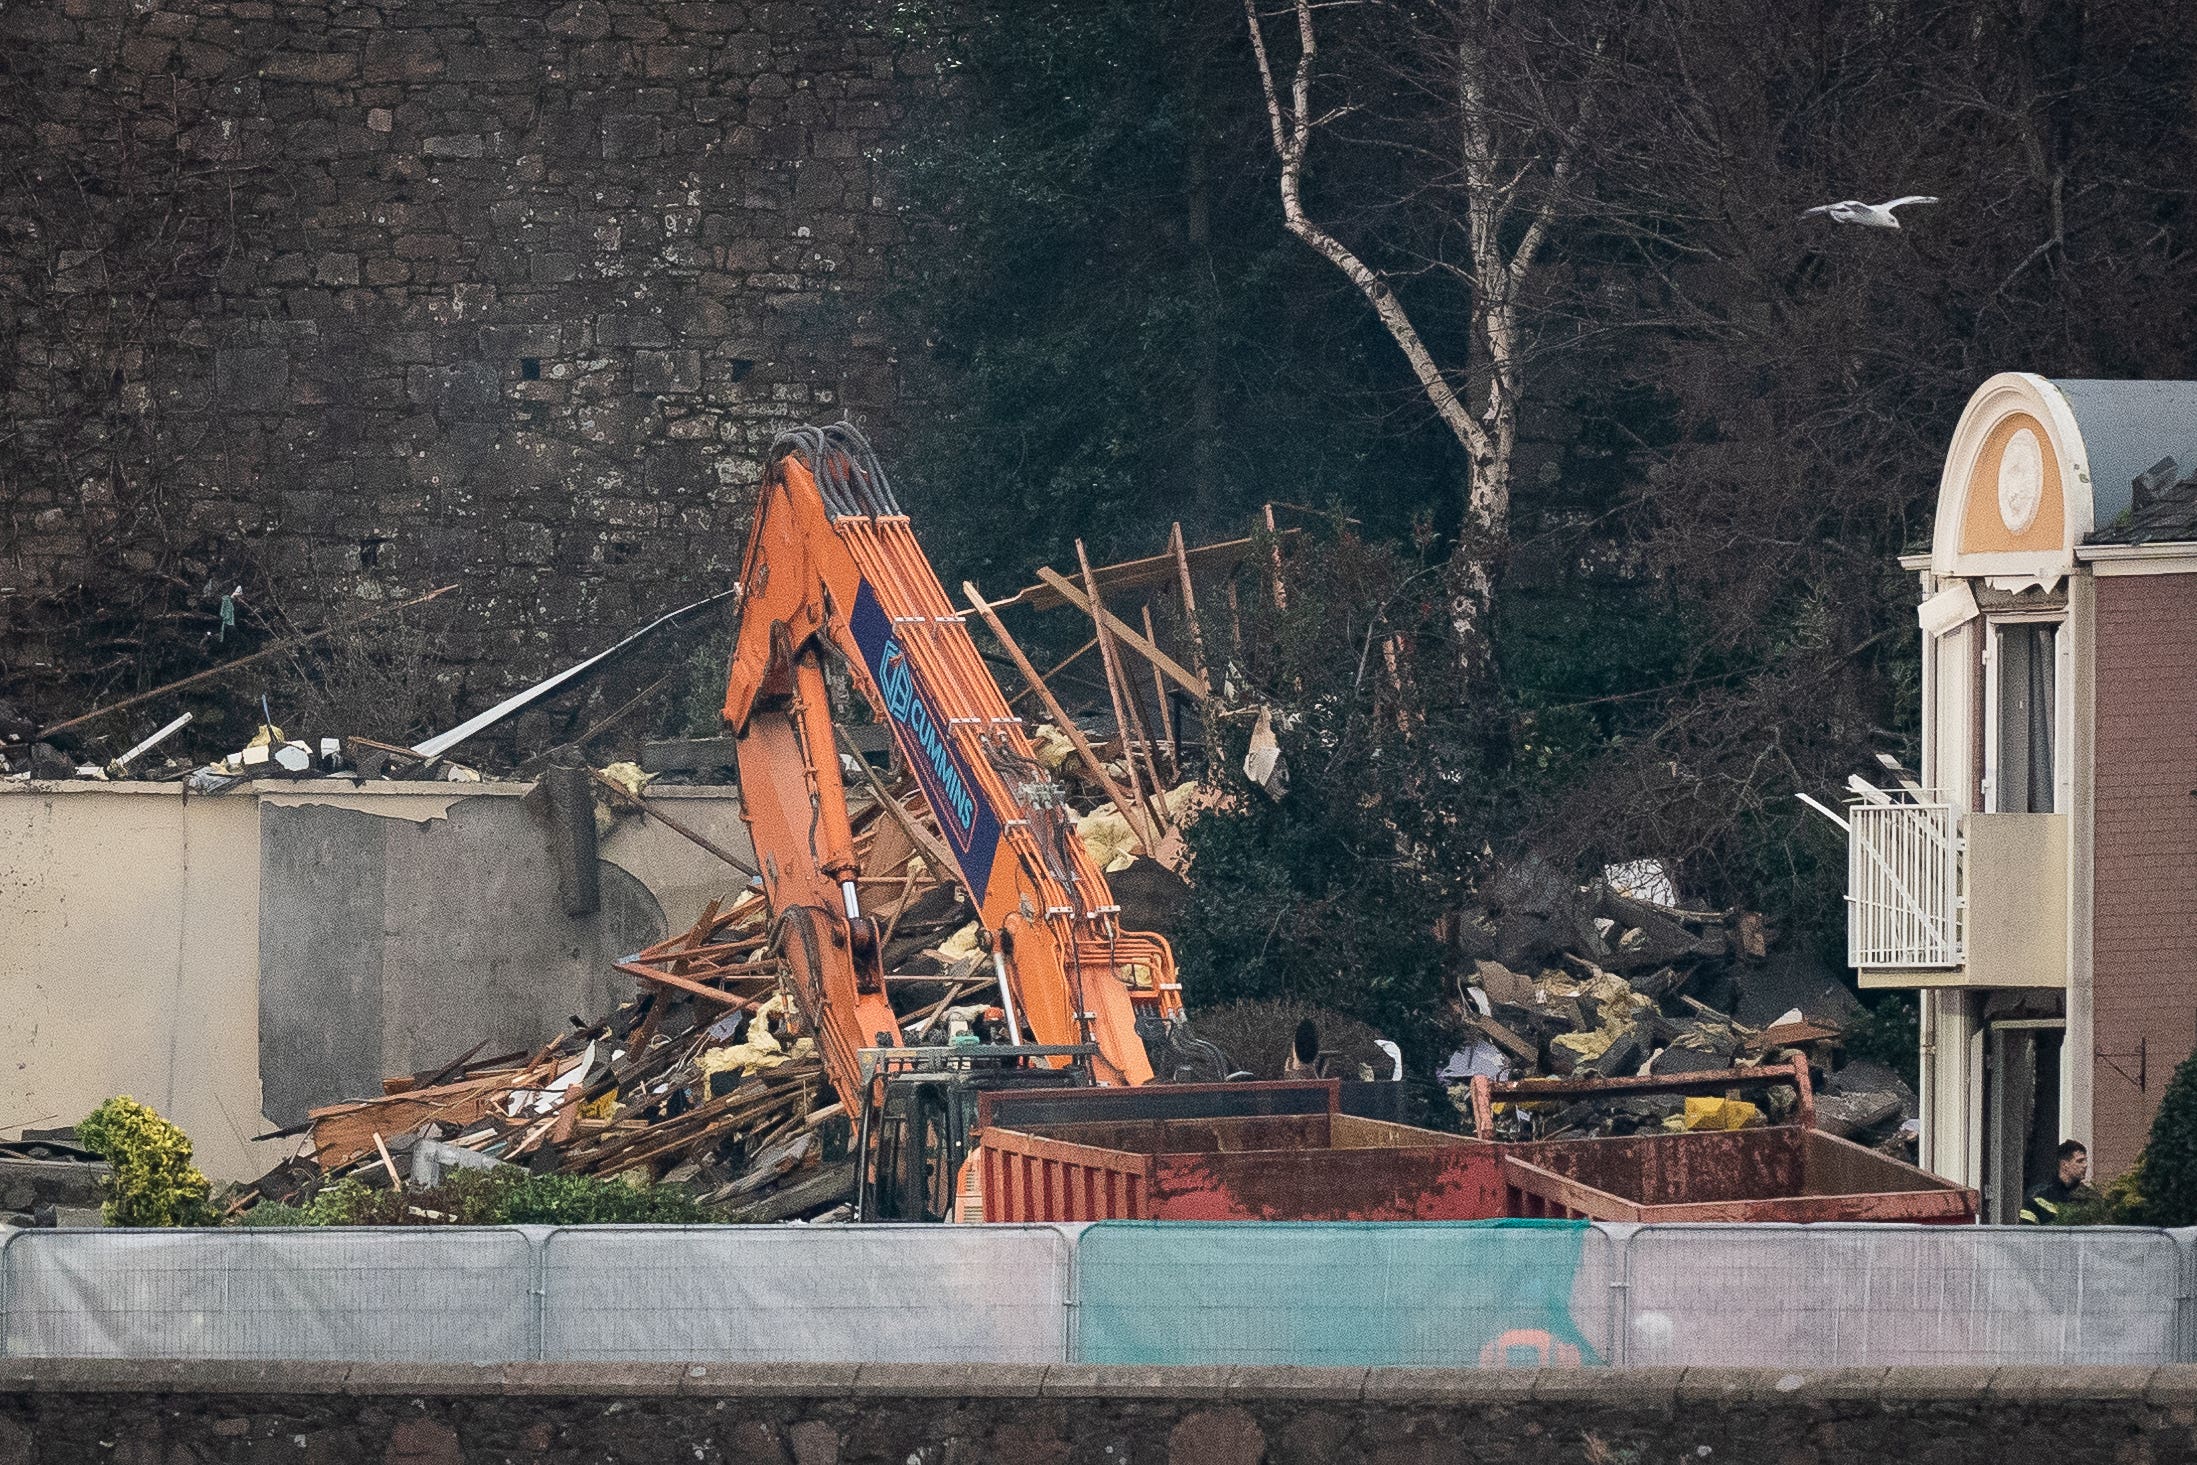 Rubble being cleared after the explosion and fire at a block of flats in St Helier, Jersey (Aaron Chown/PA)